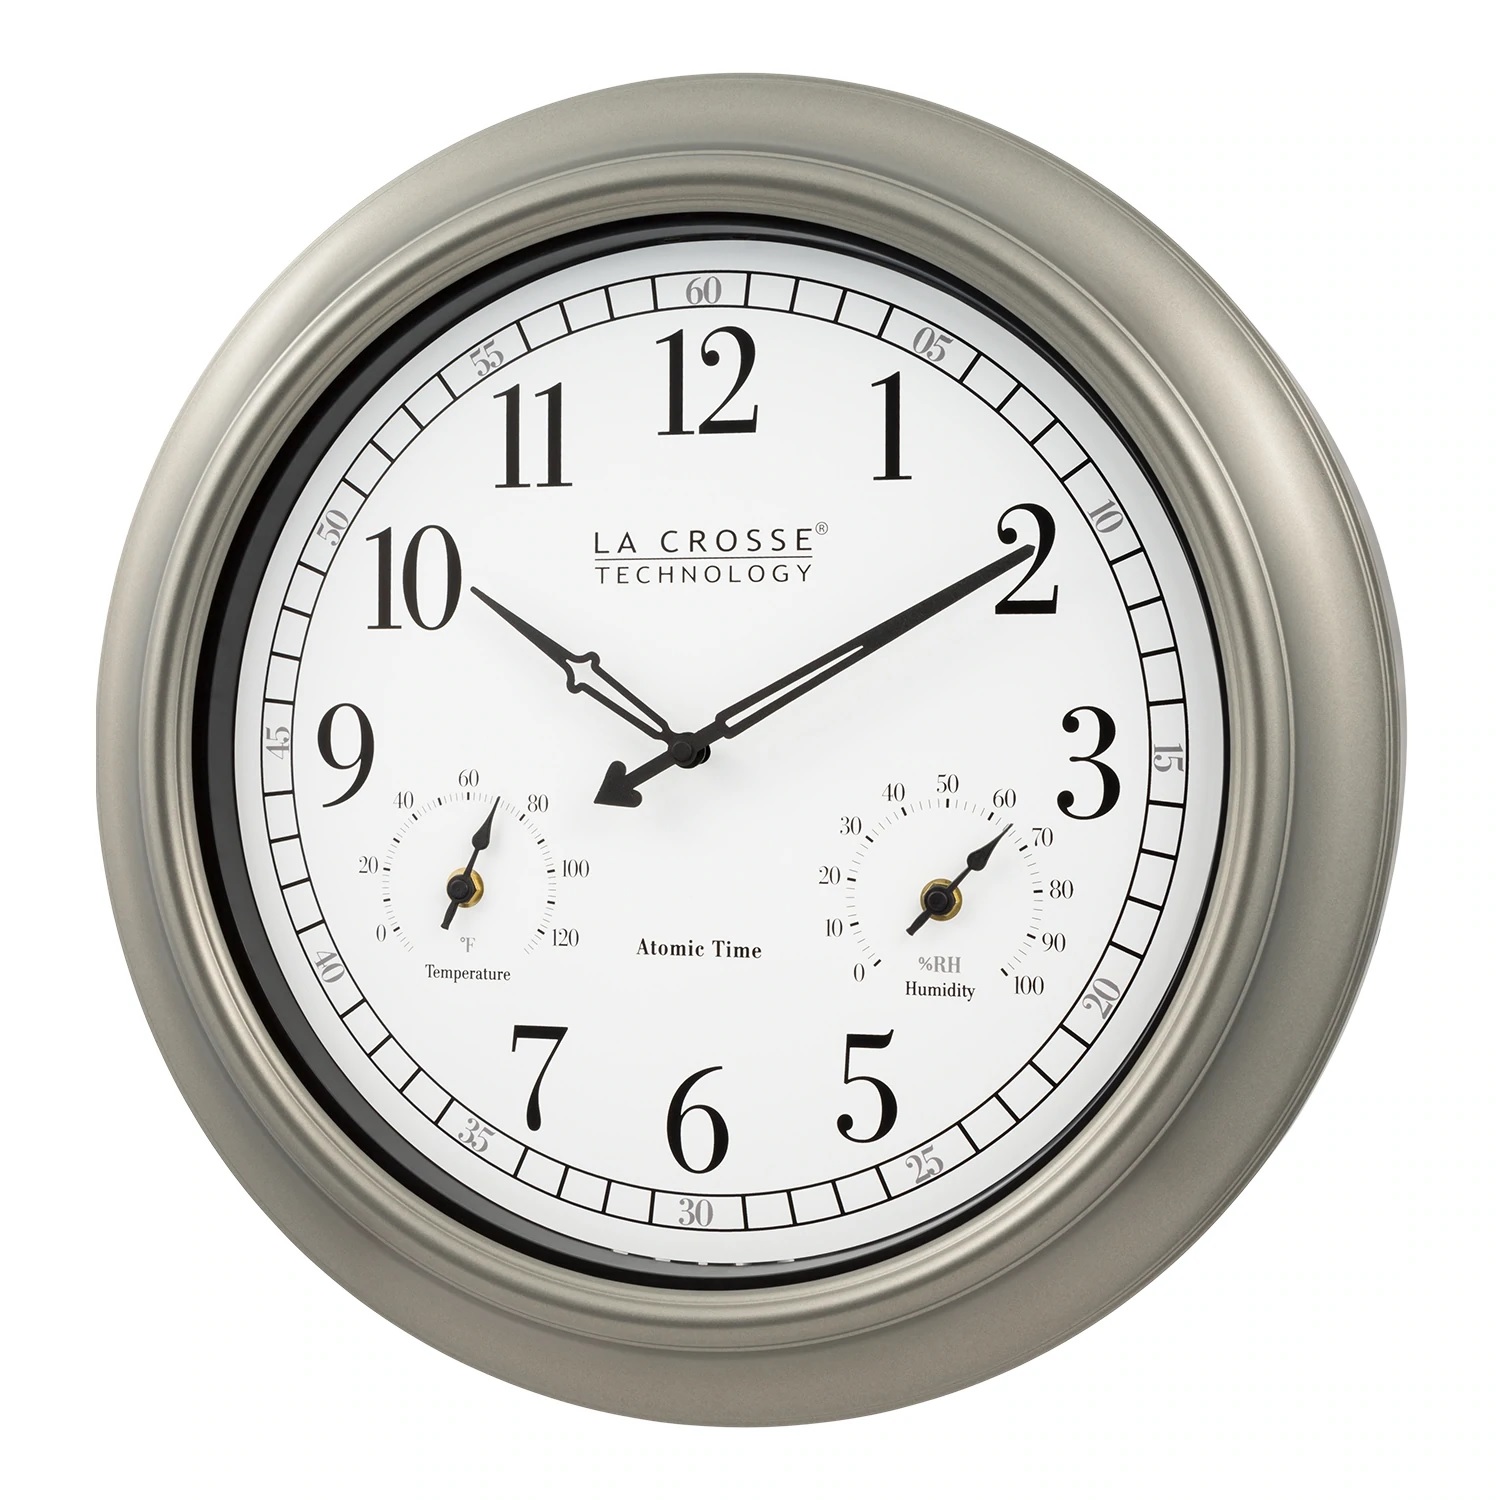 La Crosse Technology 18” White and Silver Indoor or Outdoor Atomic Wall Clock